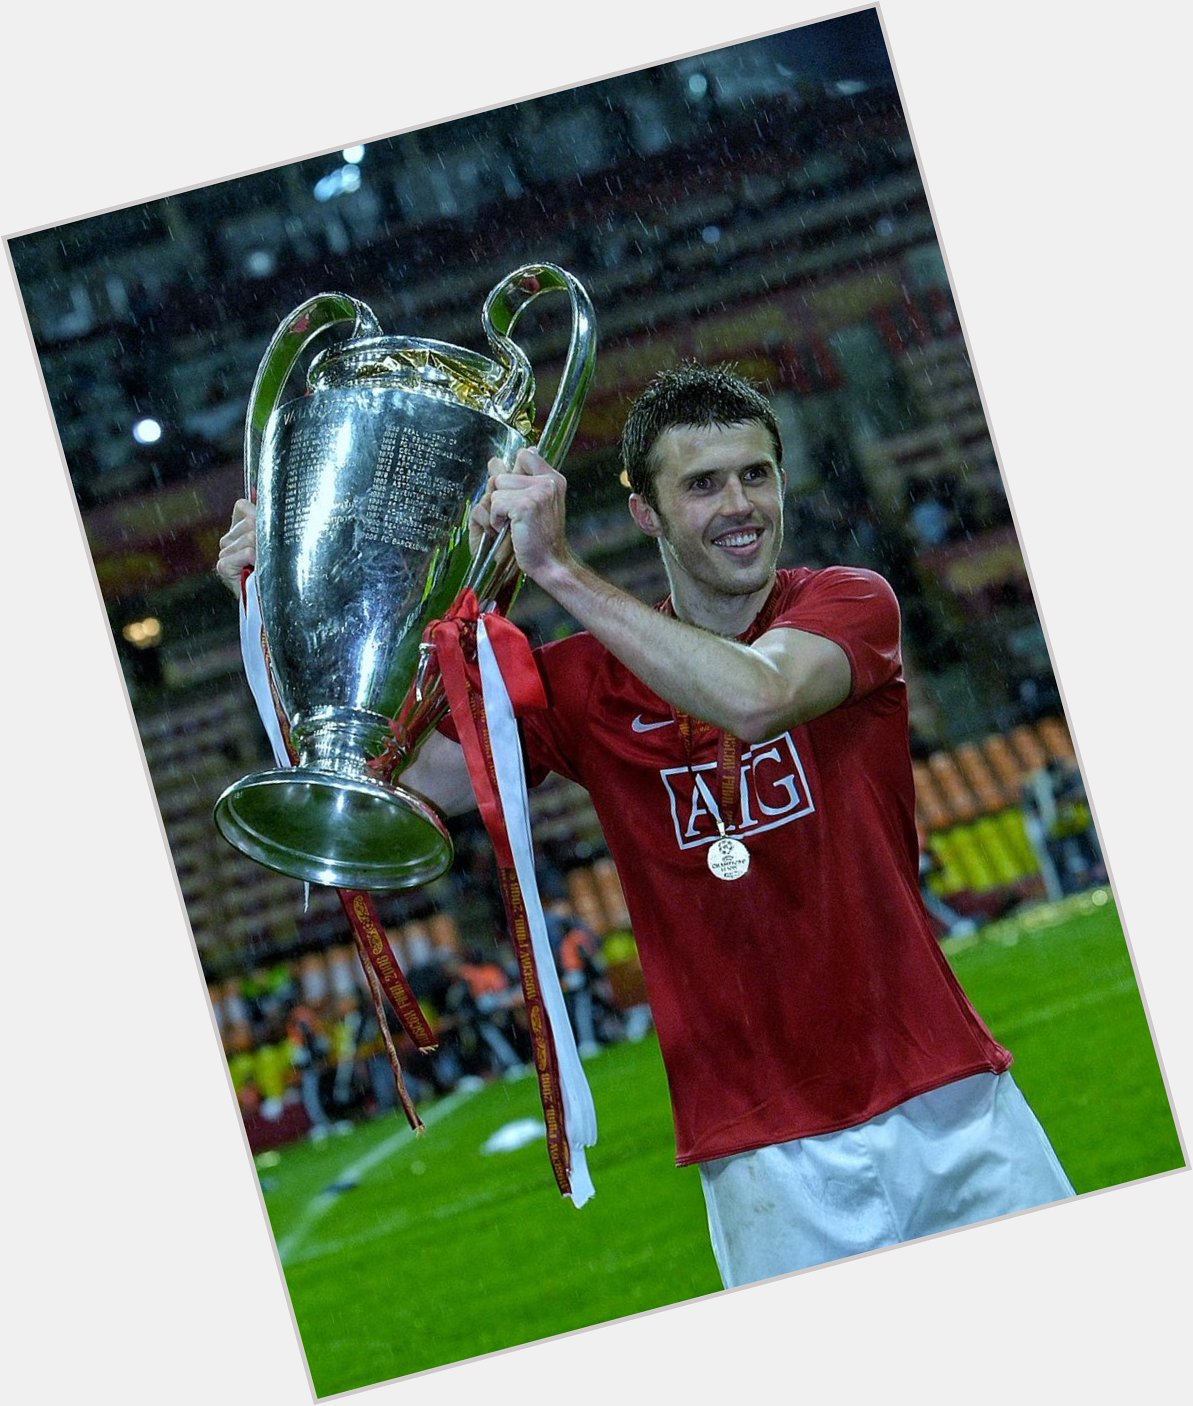 Happy 40th birthday, Michael Carrick! What a player  